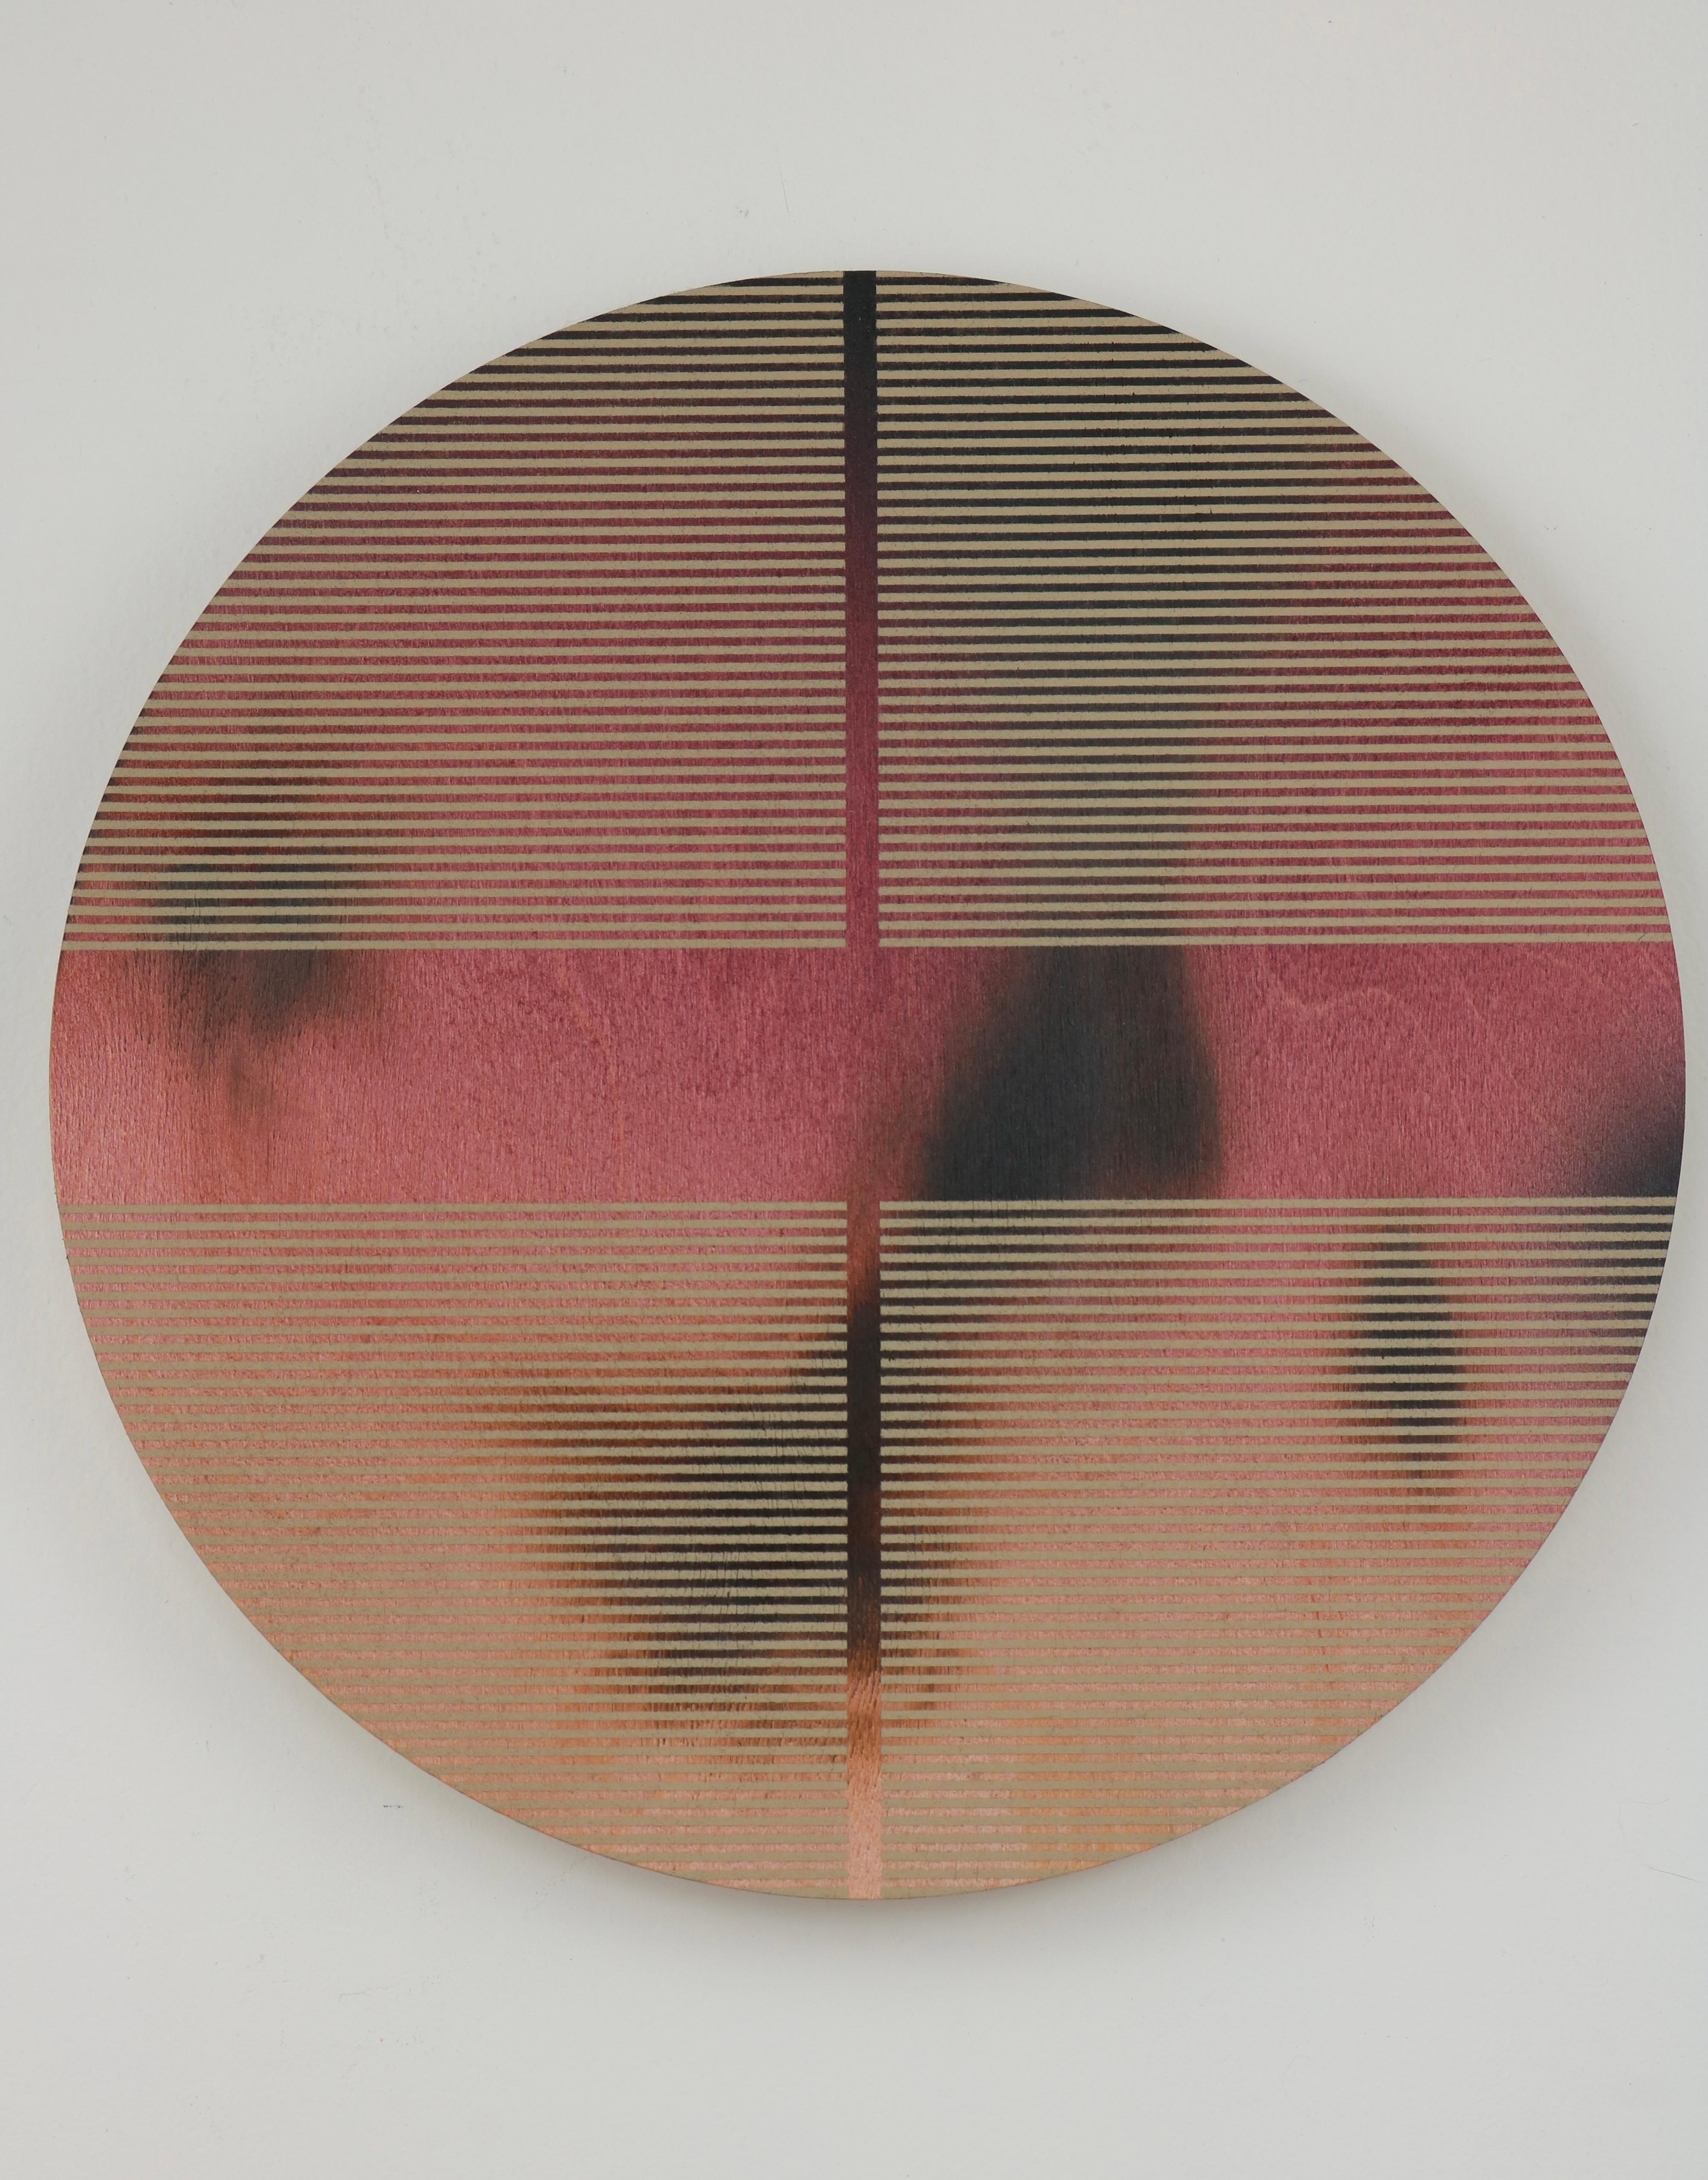 Melisa Taylor Metzger Abstract Painting - Fandango pink pill (minimaliste grid round painting on wood dopamine pink art)